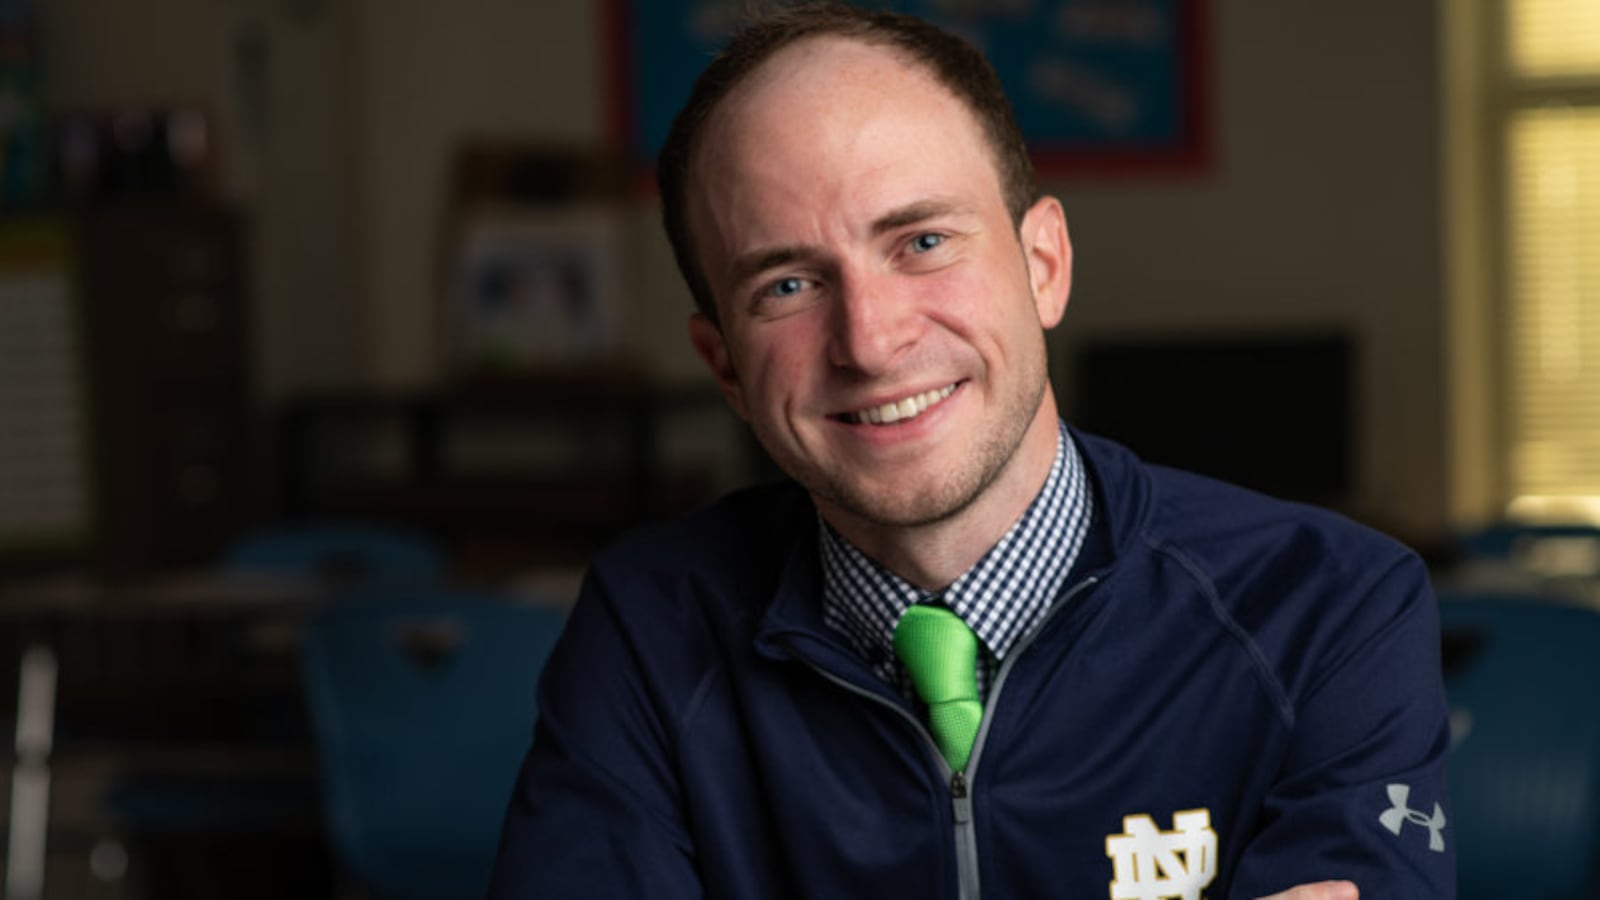 Kevin Kimberly was one of five Memphis educators selected by nonprofit New Memphis for its first class of the Educators of Excellence Awards.